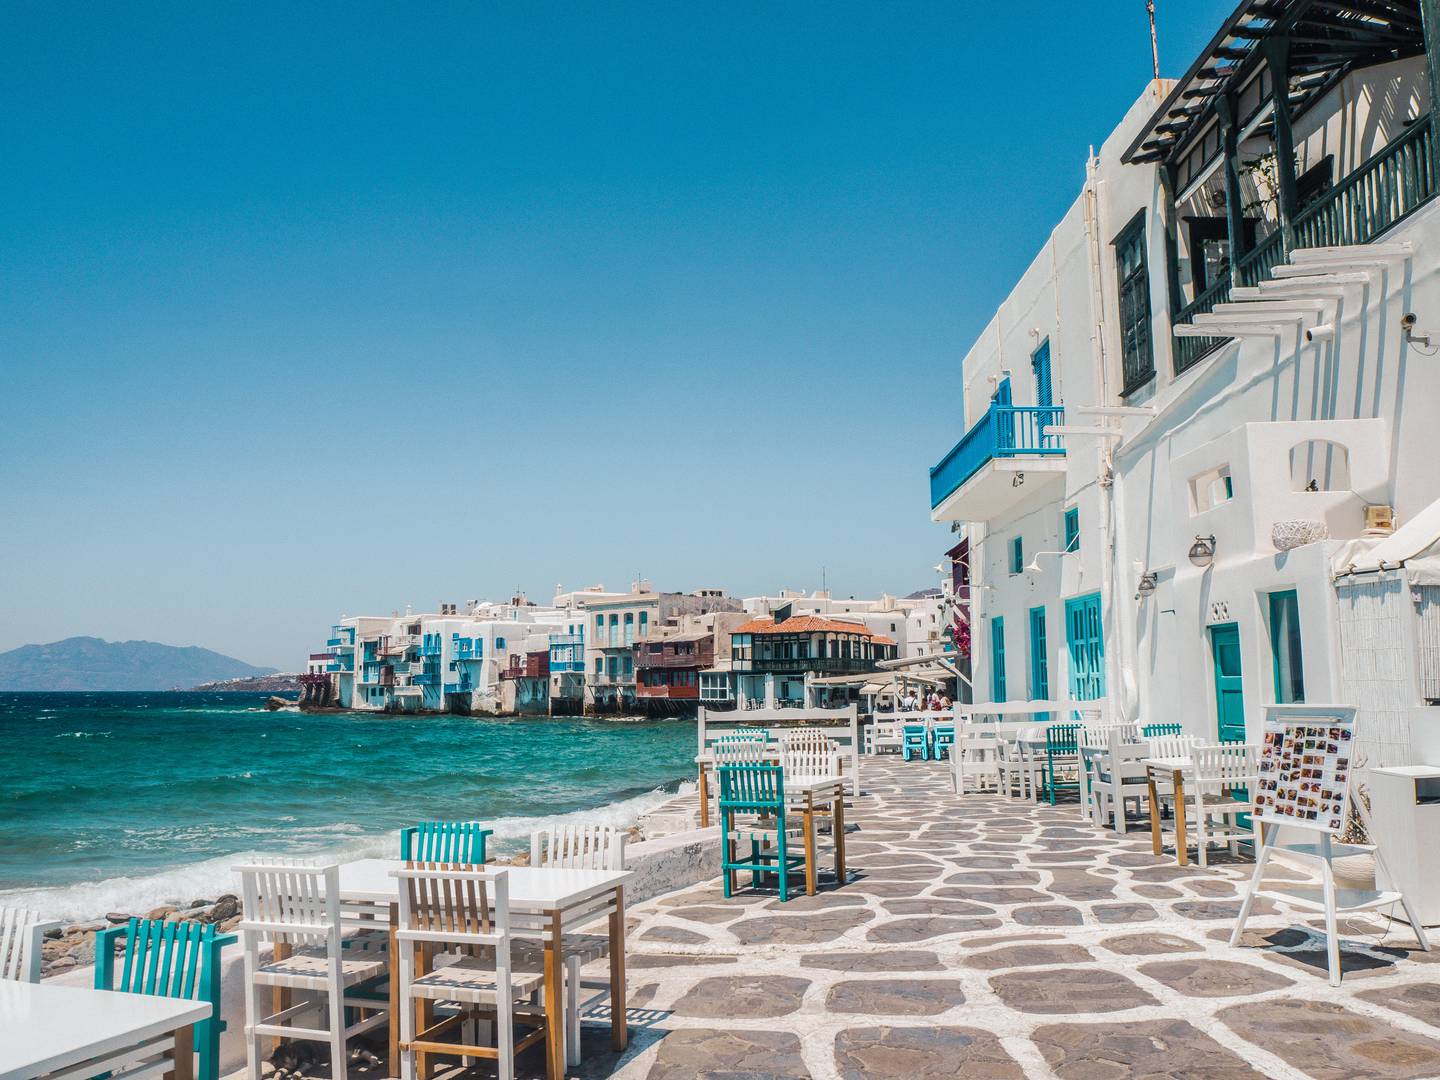 The UAE and Greece will set up a $4.2bn investment initiative that will boost tourism. Photo: Unsplash